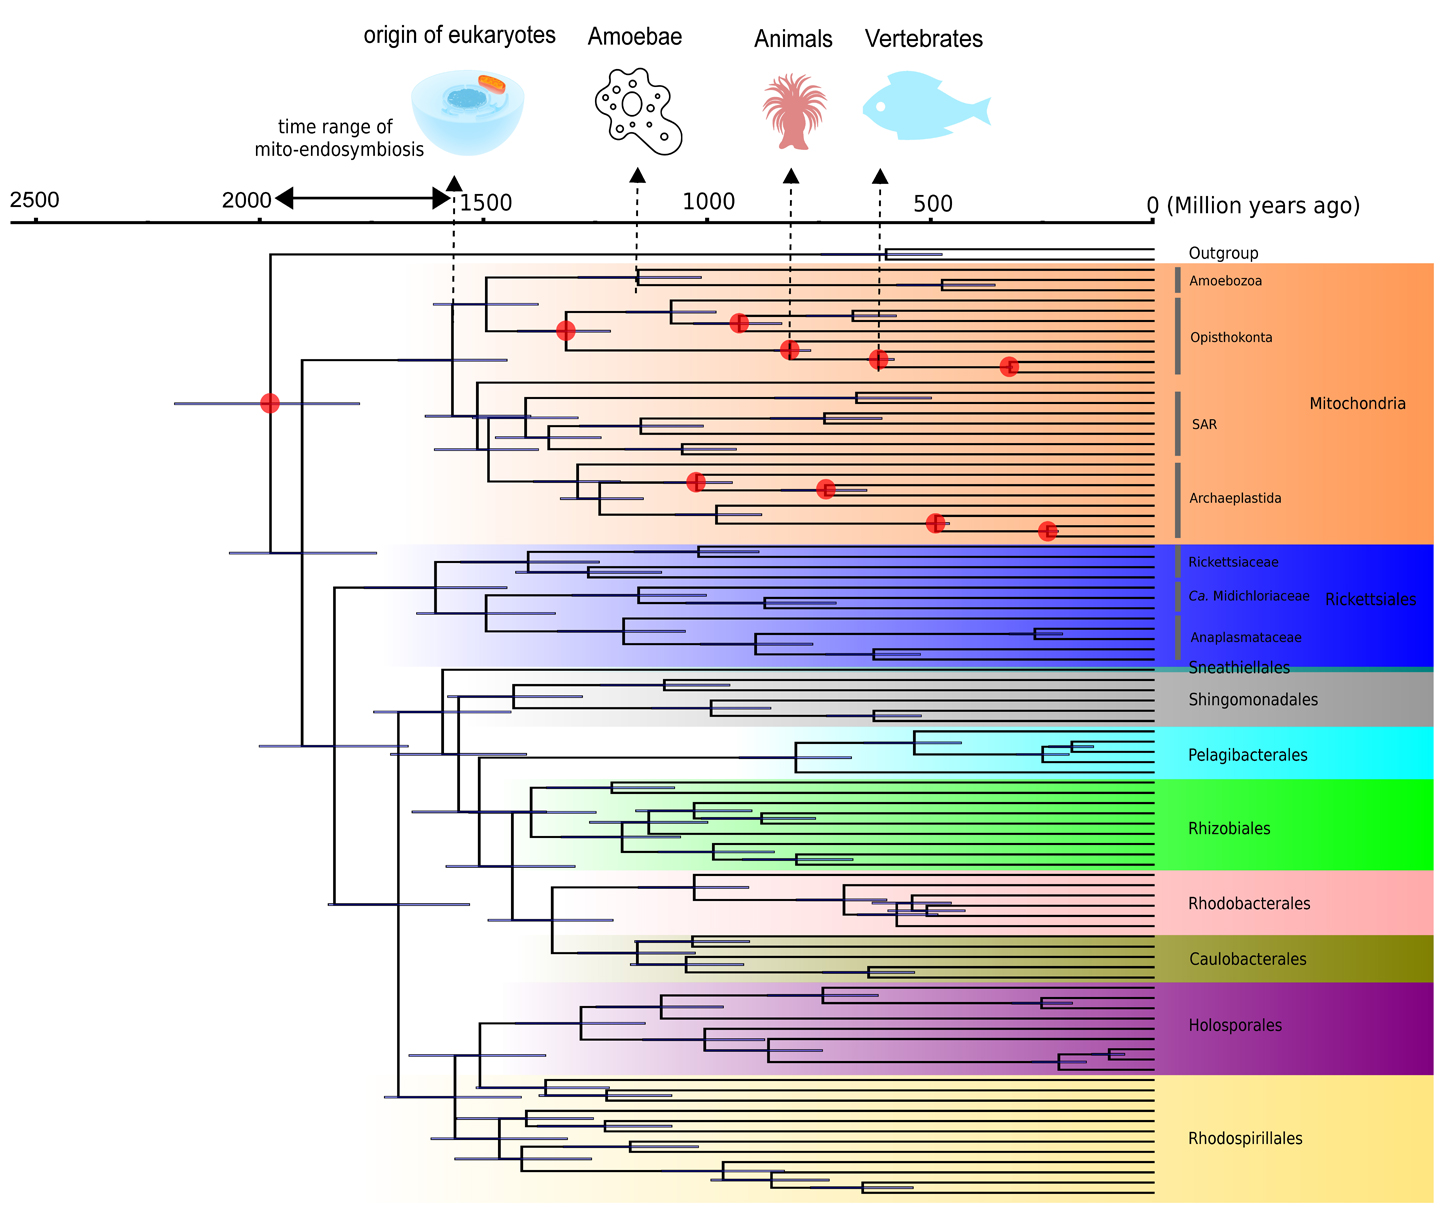 A phylogenetic tree showing the evolutionary relationships among alphaproteobacterial groups and mitochondria